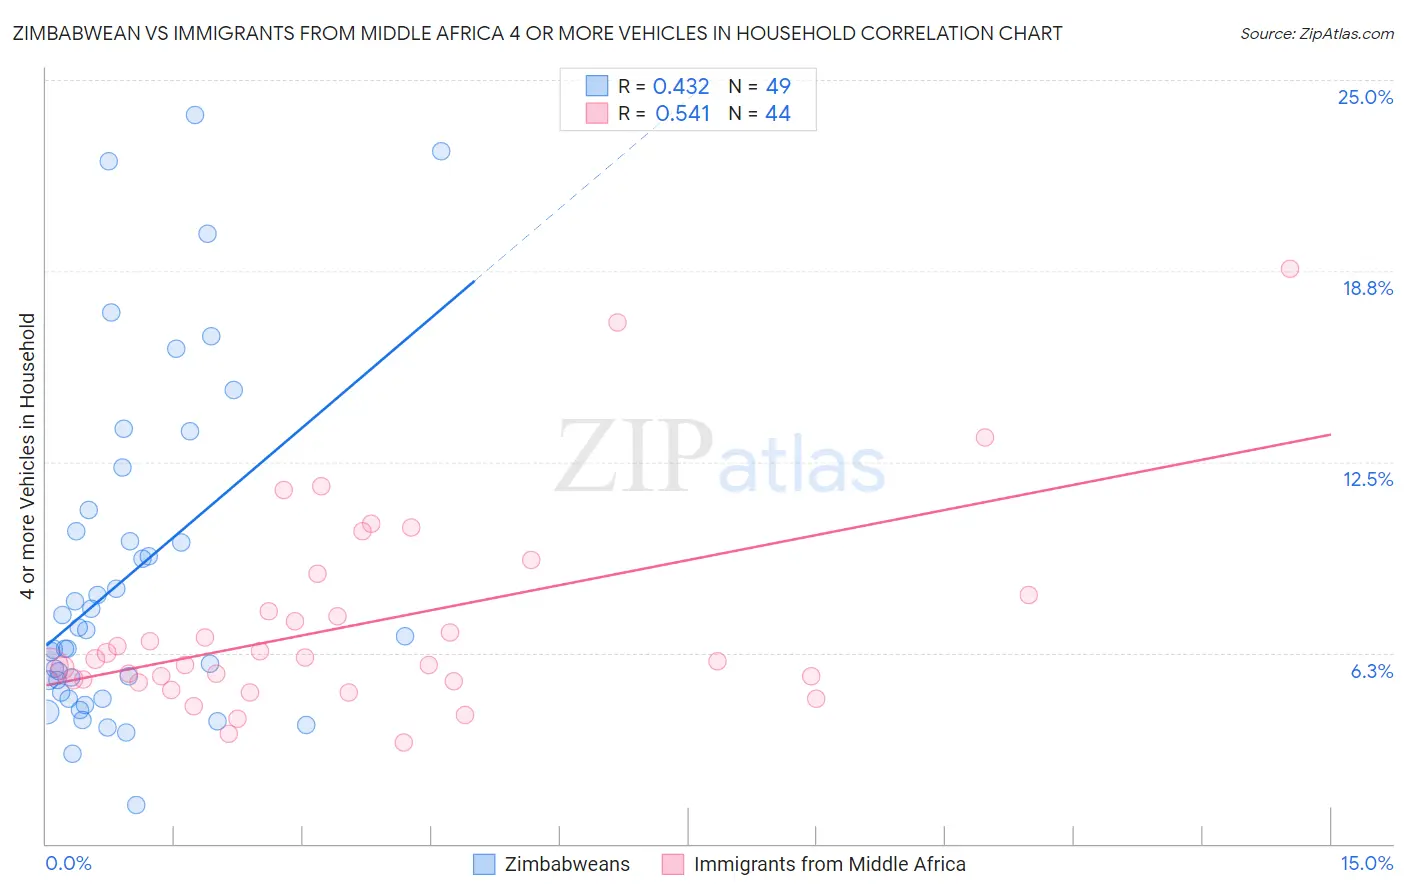 Zimbabwean vs Immigrants from Middle Africa 4 or more Vehicles in Household